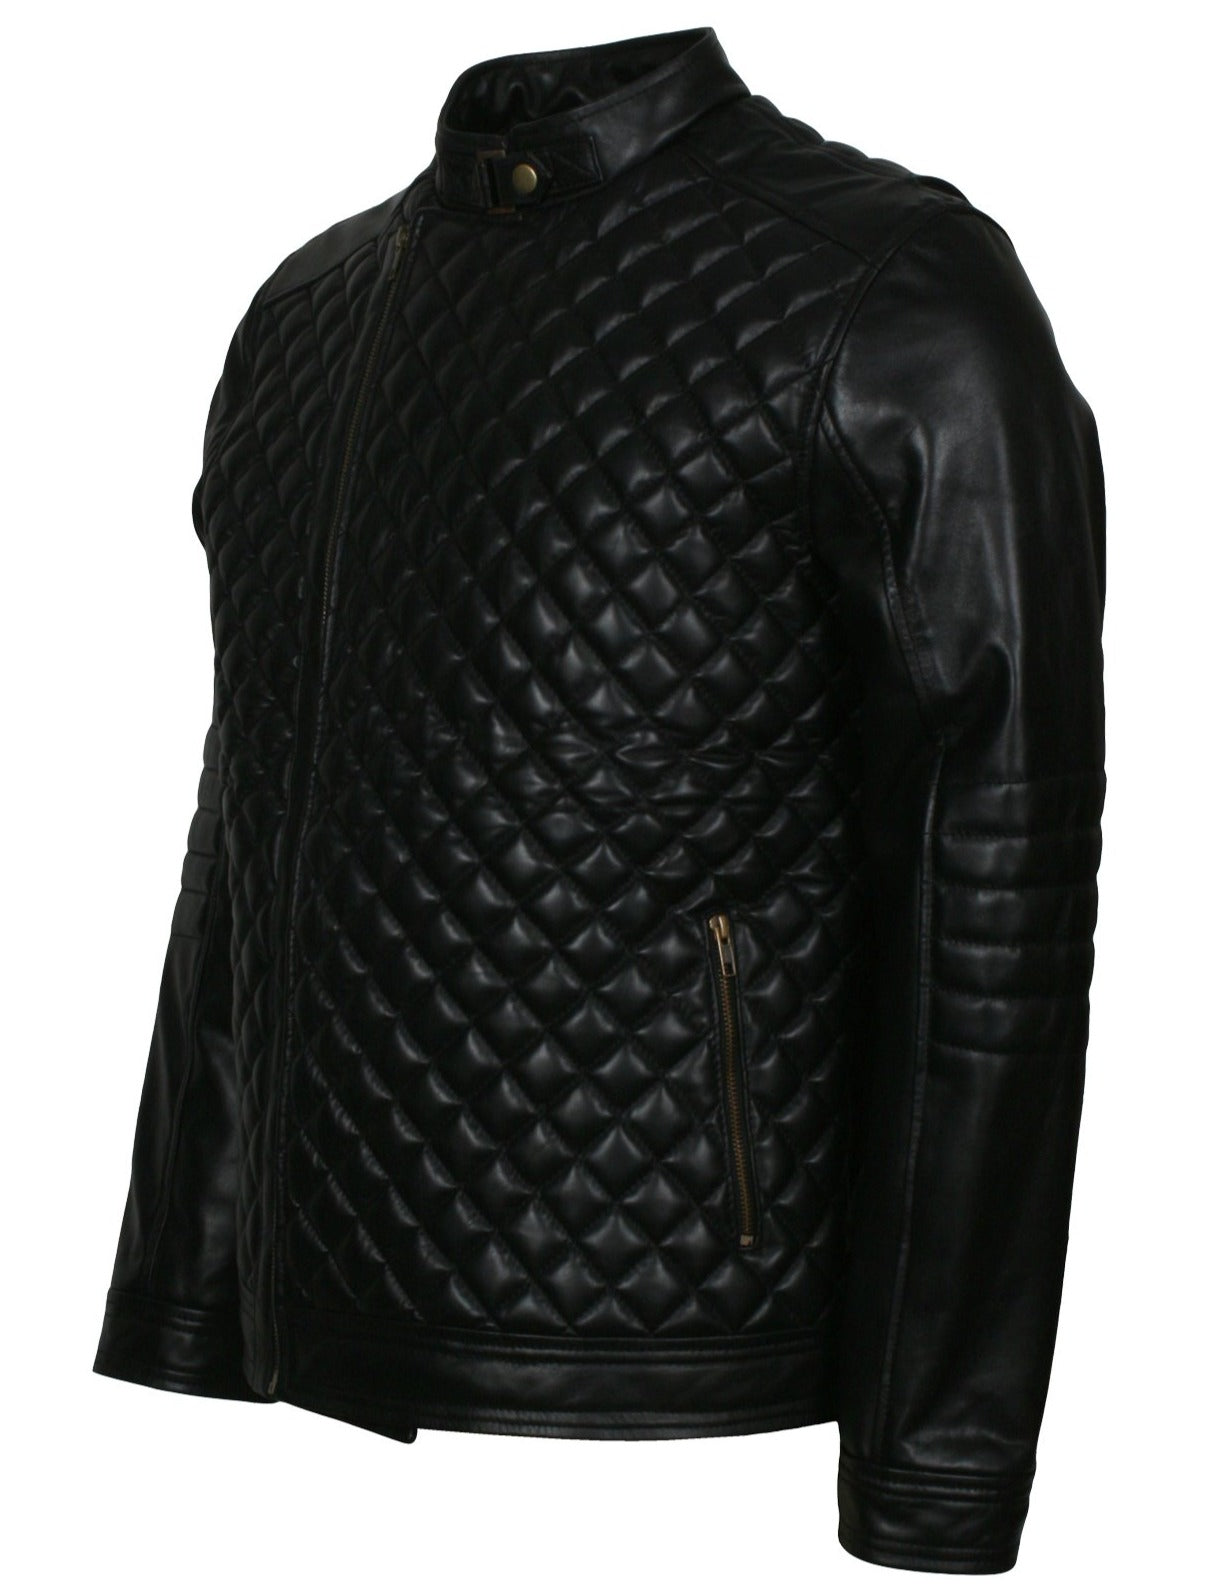 Diamond Quilted Leather Jacket Mens